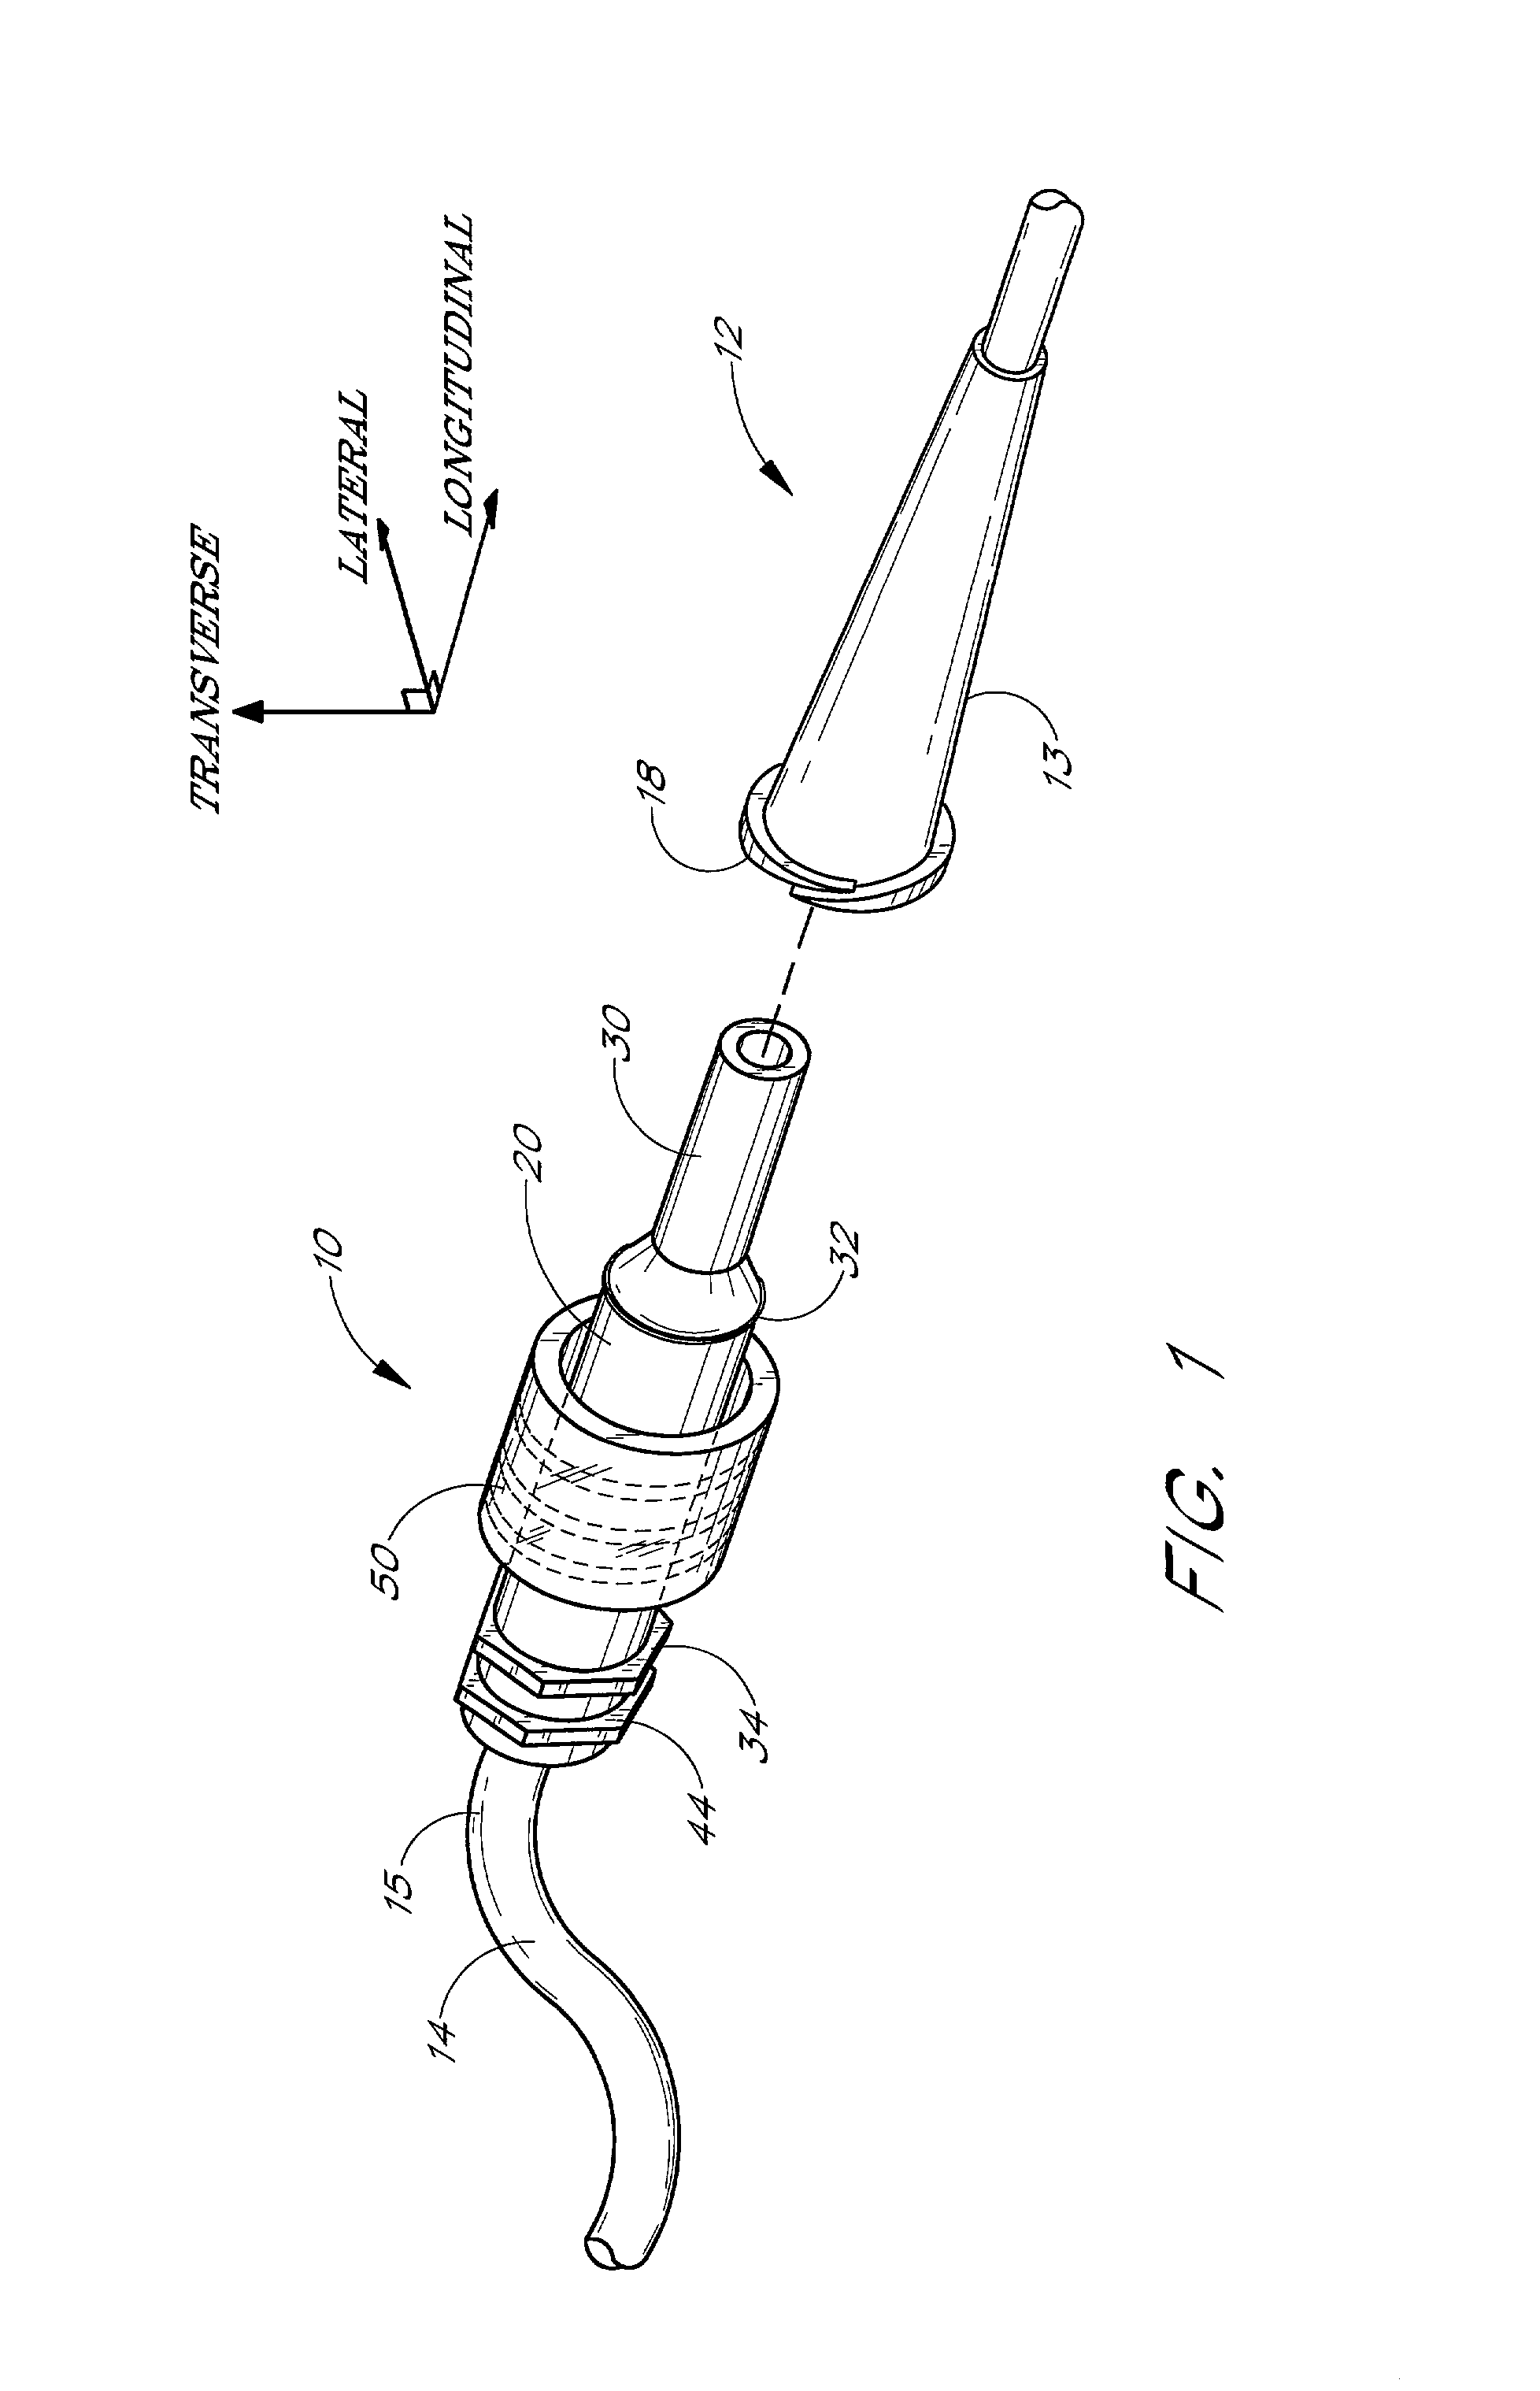 Medical device connector fitting